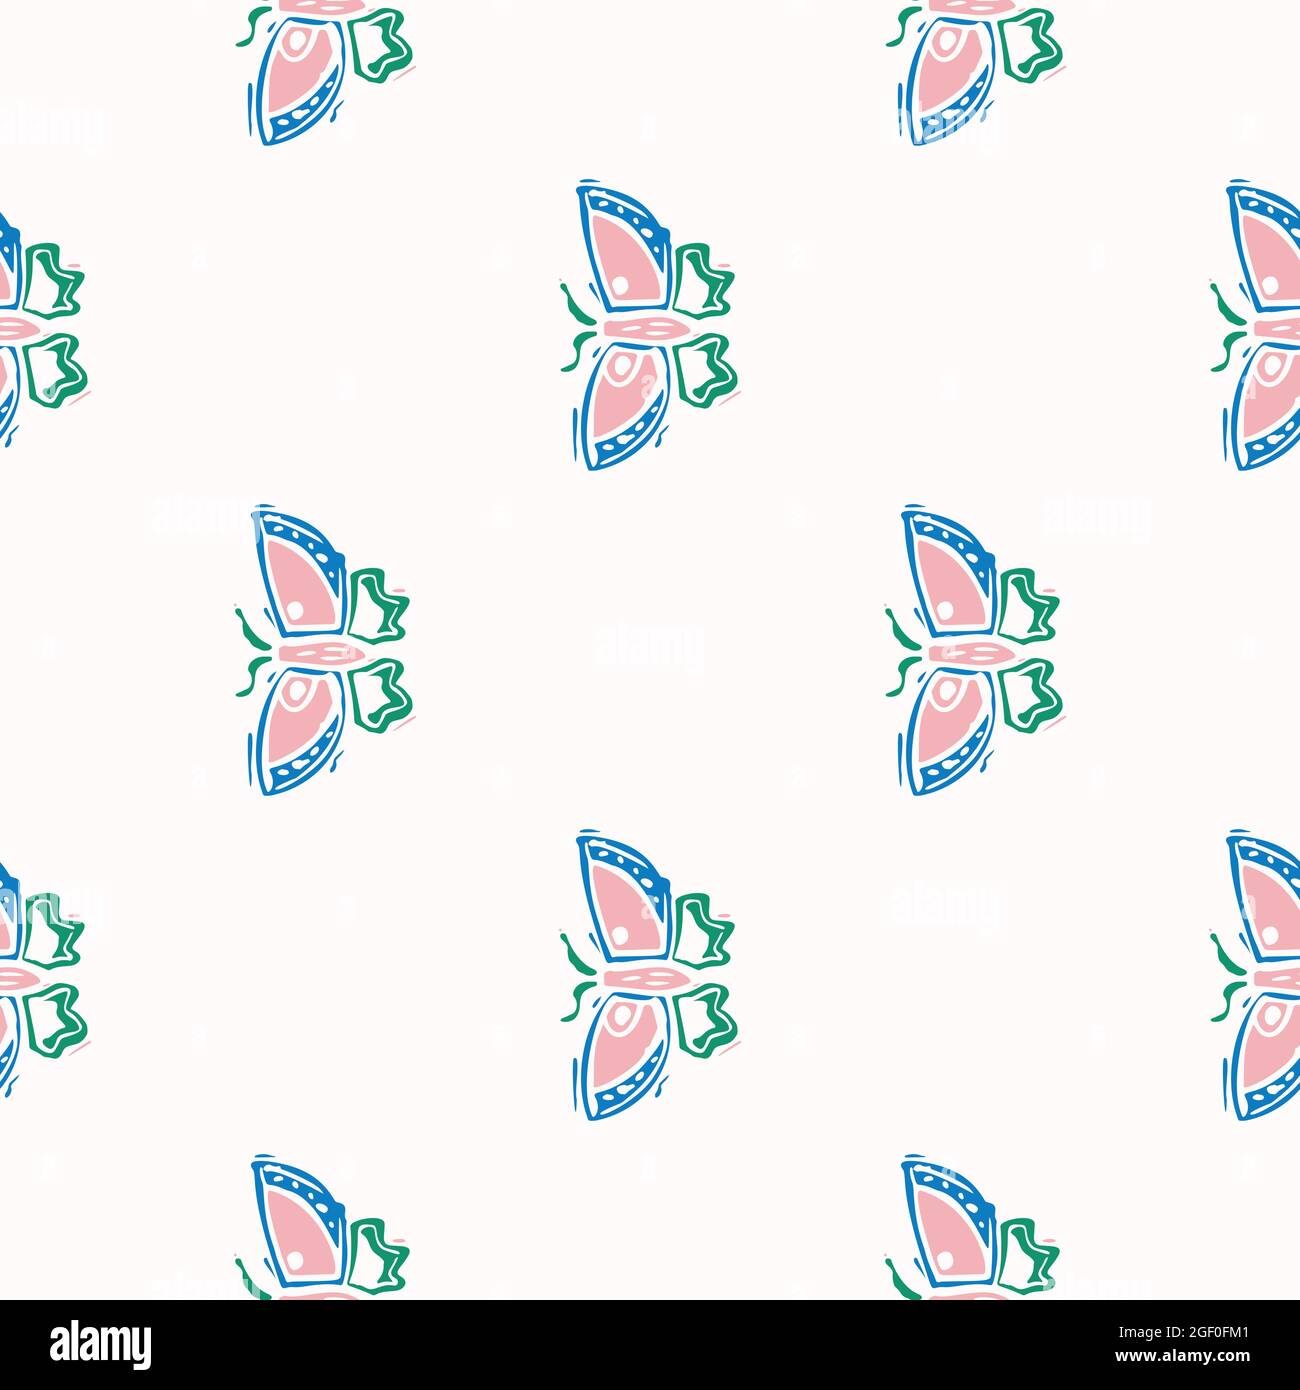 Playful fresh doodle butterfly shape seamless background. Modern trendy minimal retro style motif pattern. Hand drawn simple colorful design isolated Stock Vector